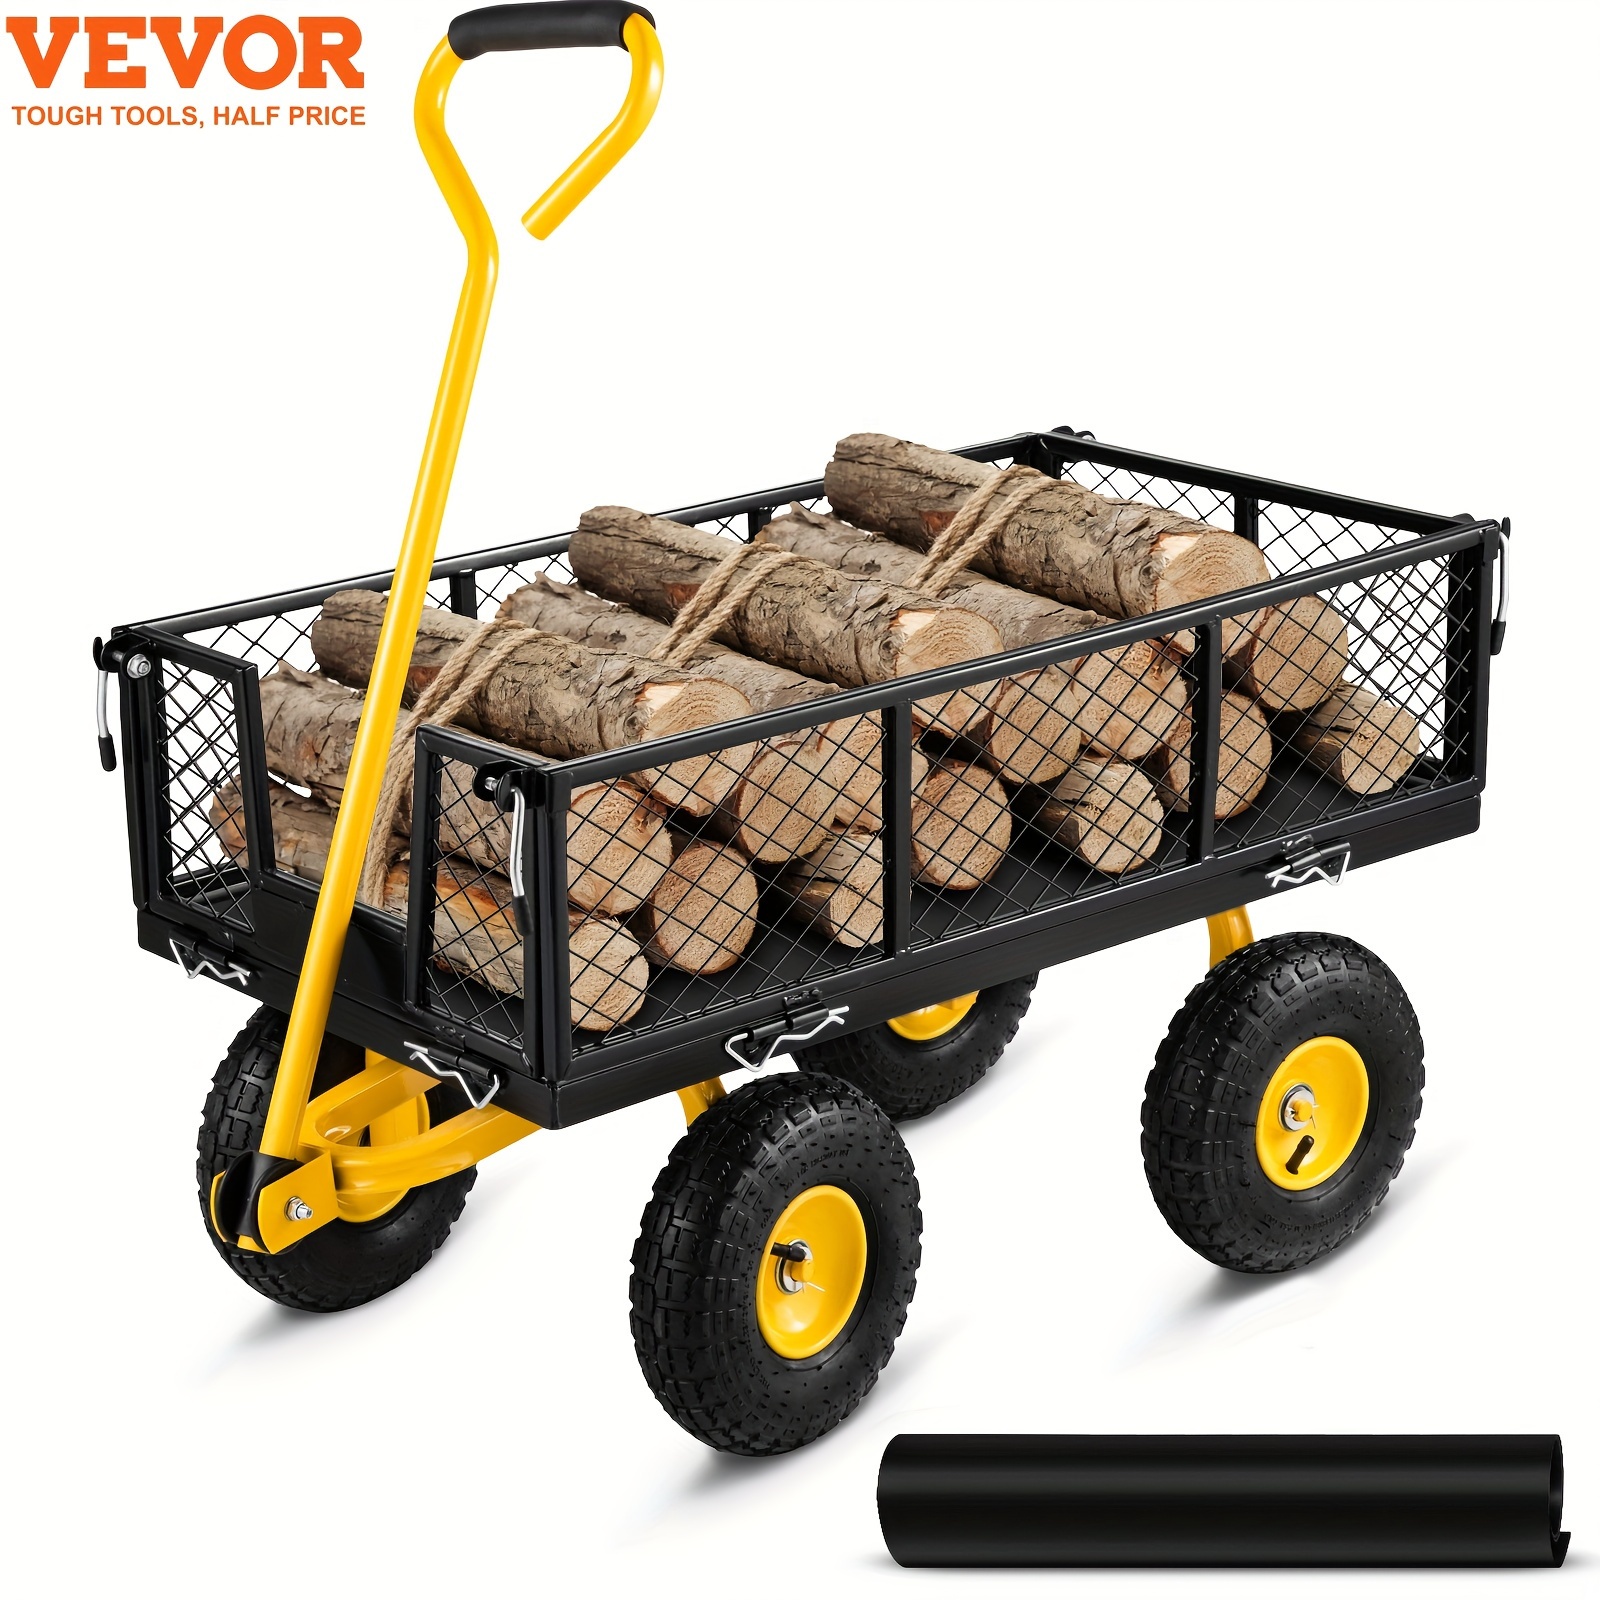 

Steel Garden Cart, Heavy Duty 500 Lbs Capacity, With Removable Mesh Sides To Convert Into Flatbed, Utility Metal Wagon With 180° Rotating Handle And 10 In Tires, Perfect For Garden